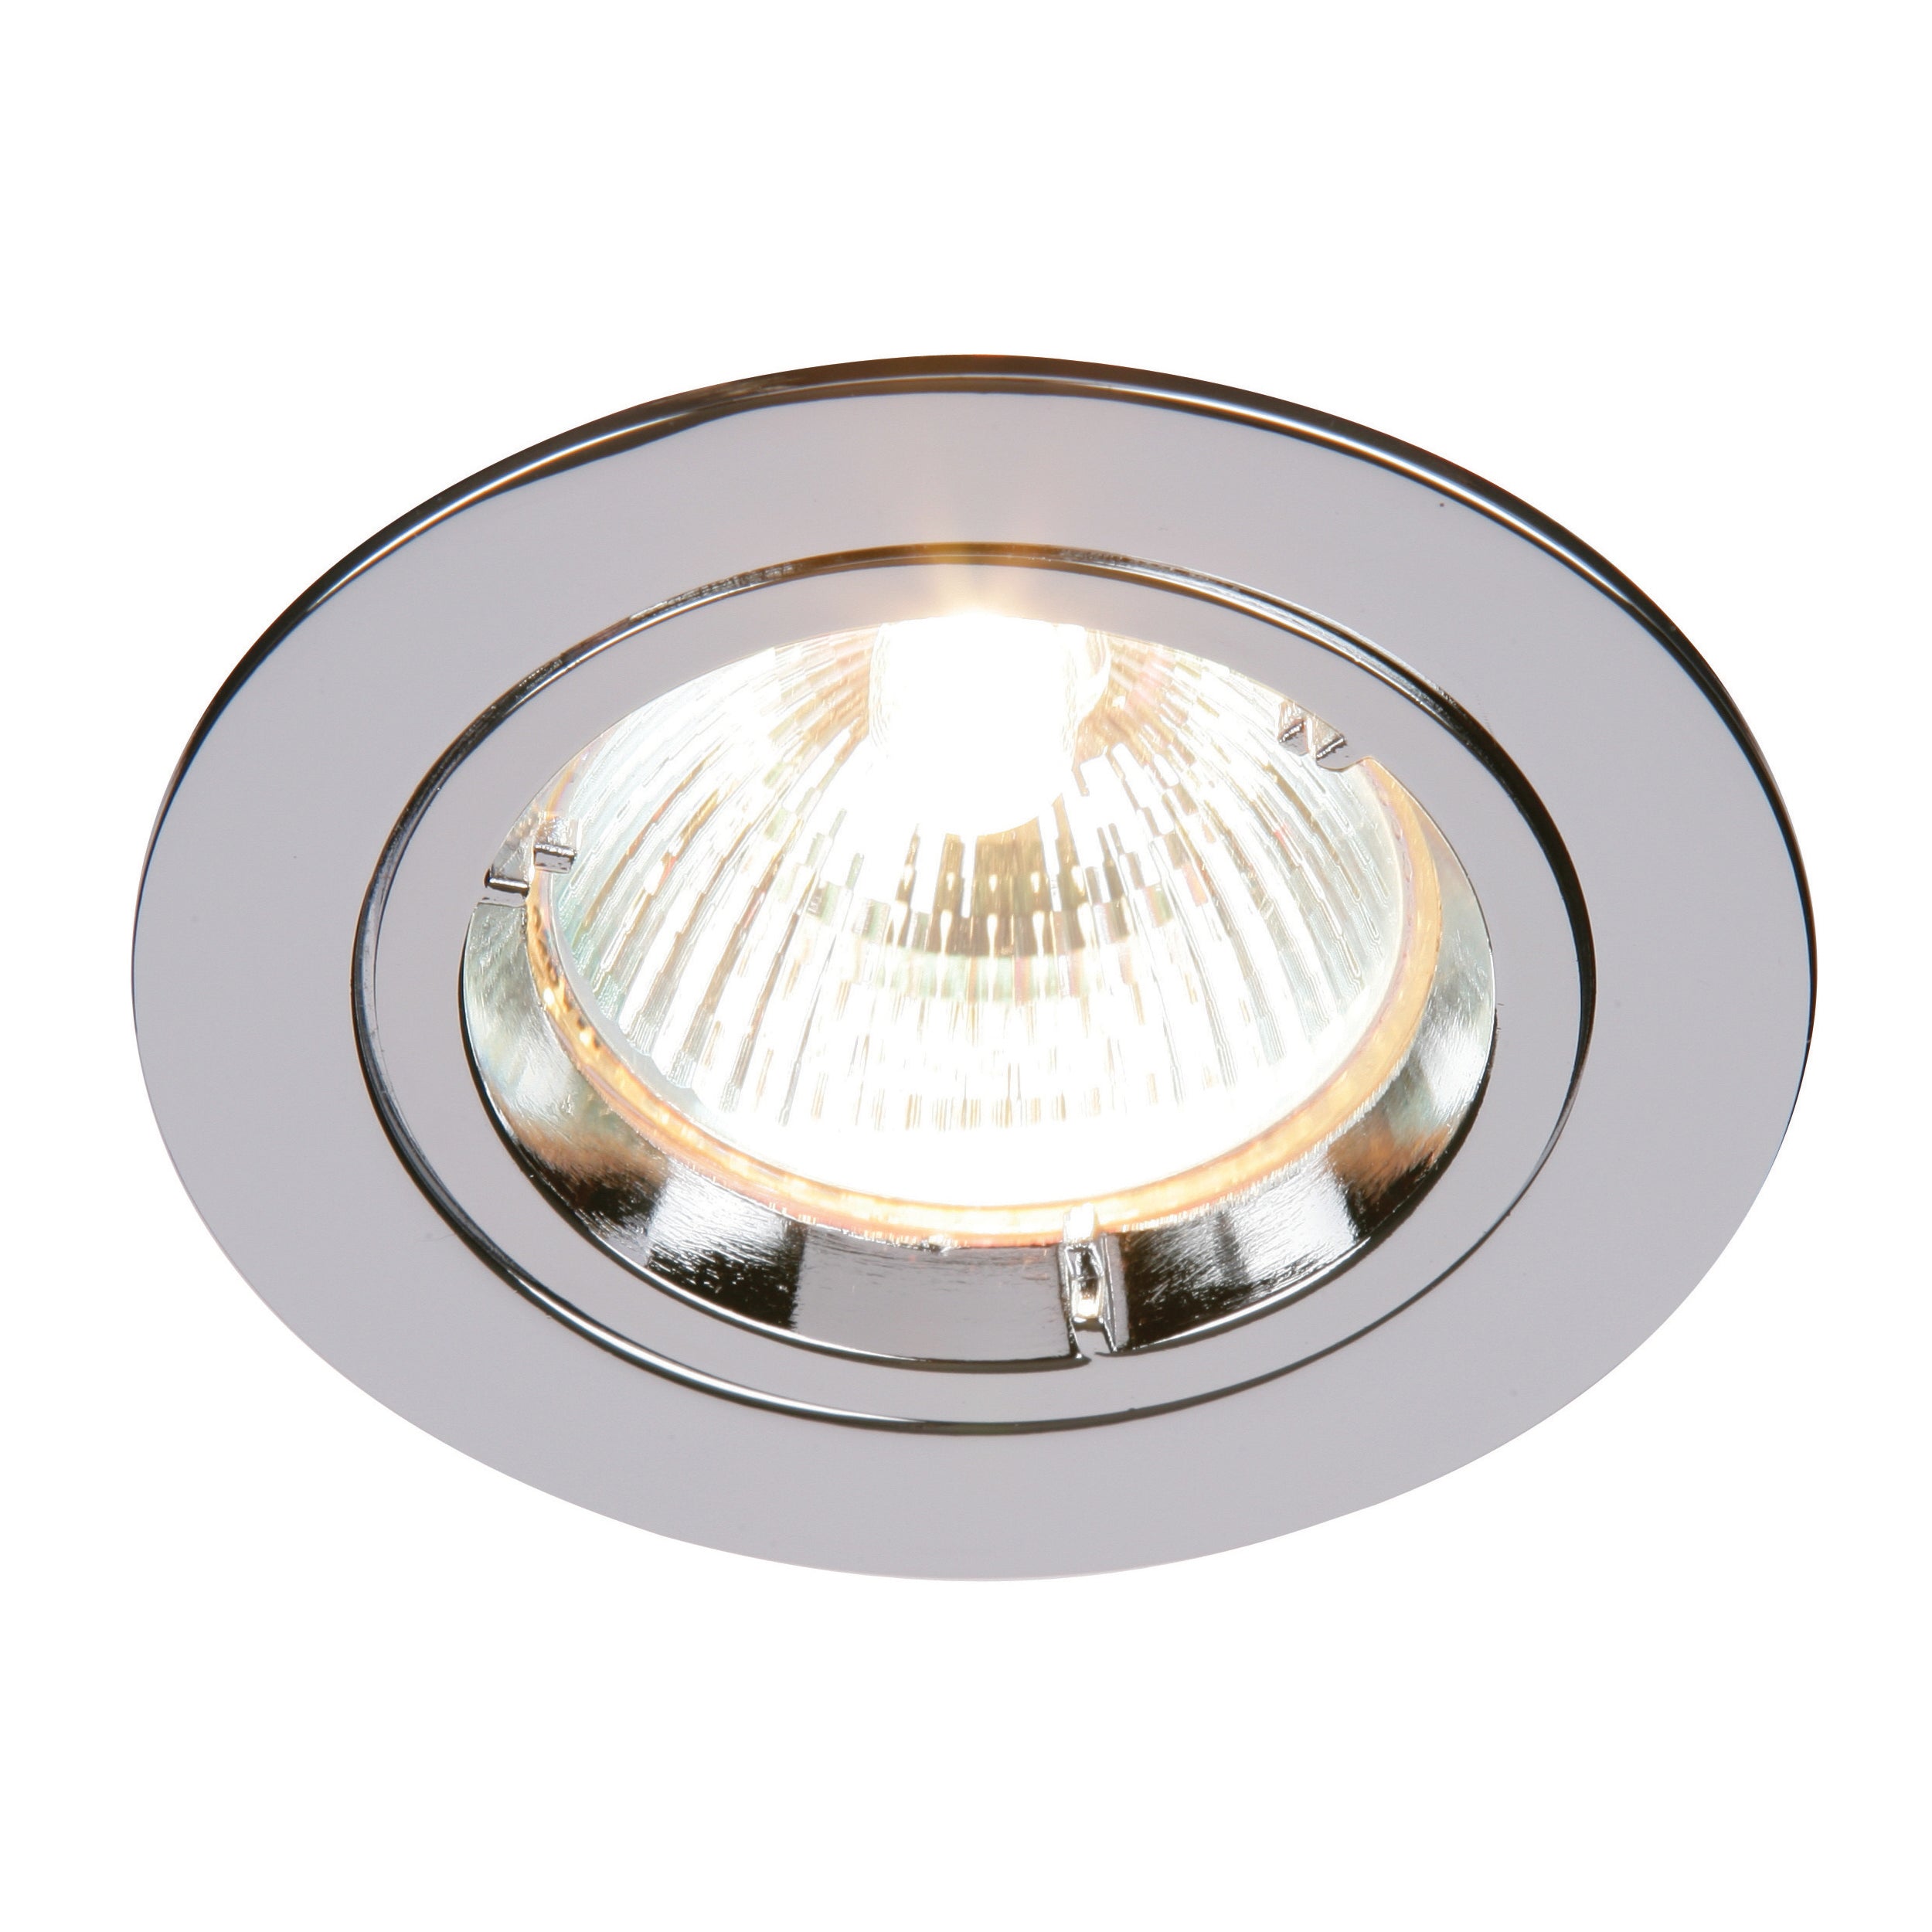 Saxby Lighting Cast fixed 50W 52329